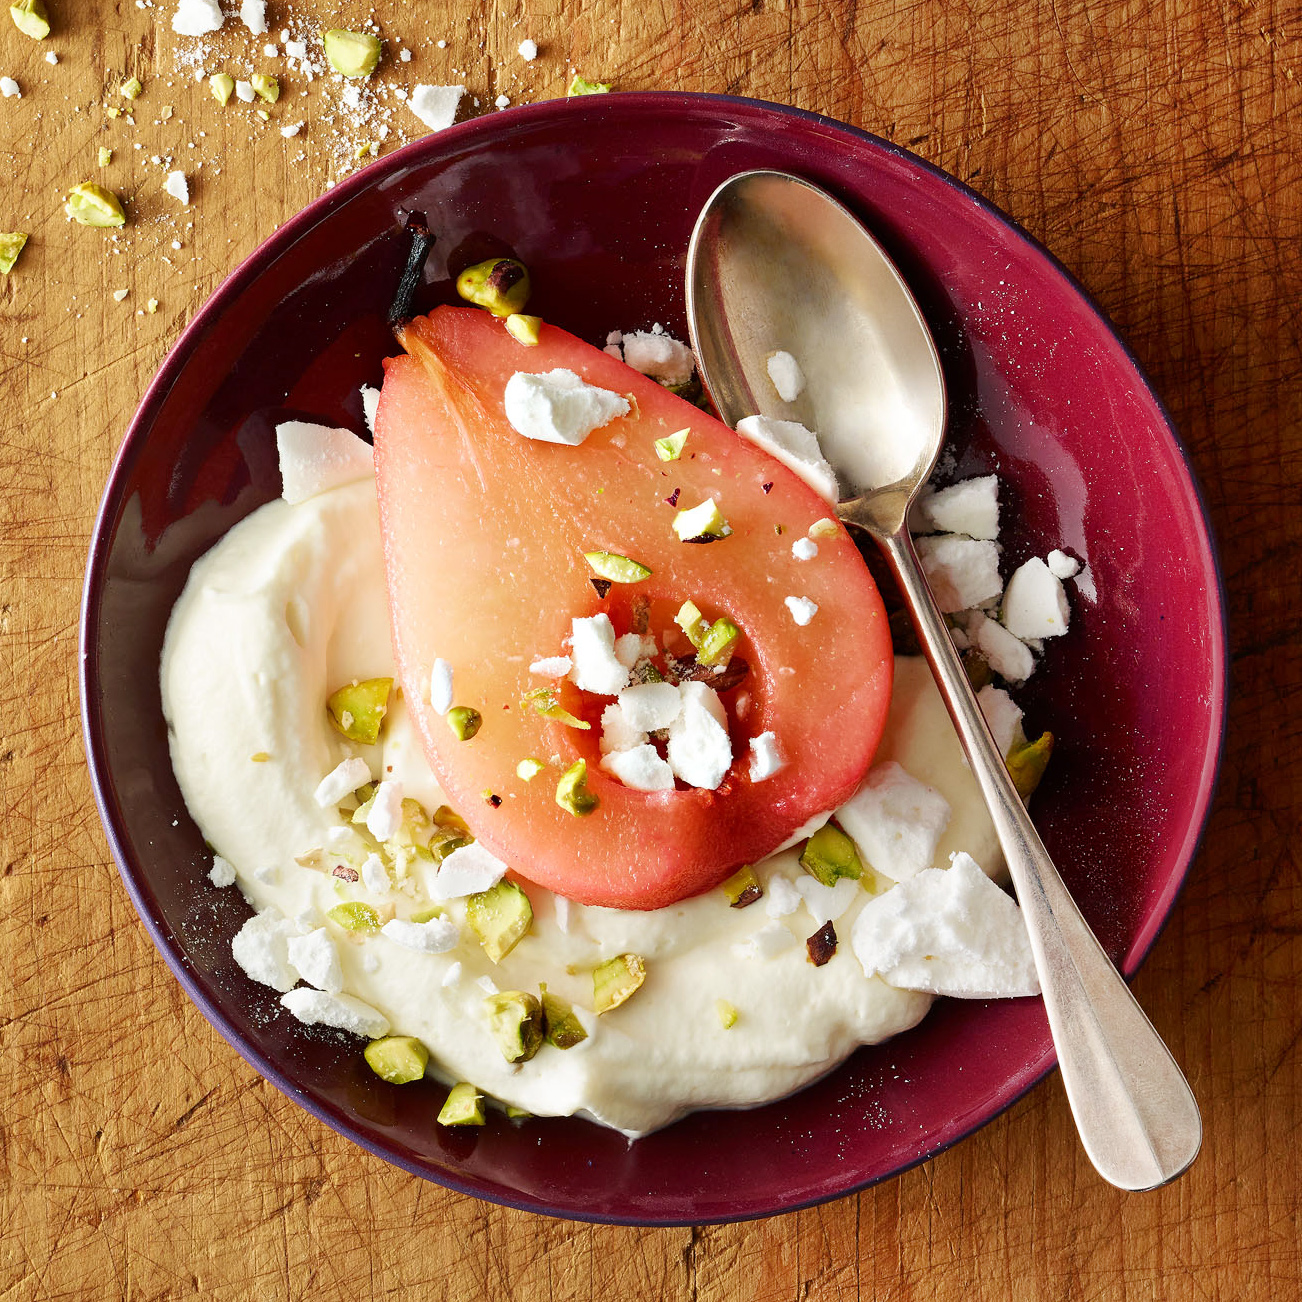 Cranberry-Poached Pears with Vanilla Meringue Crunch